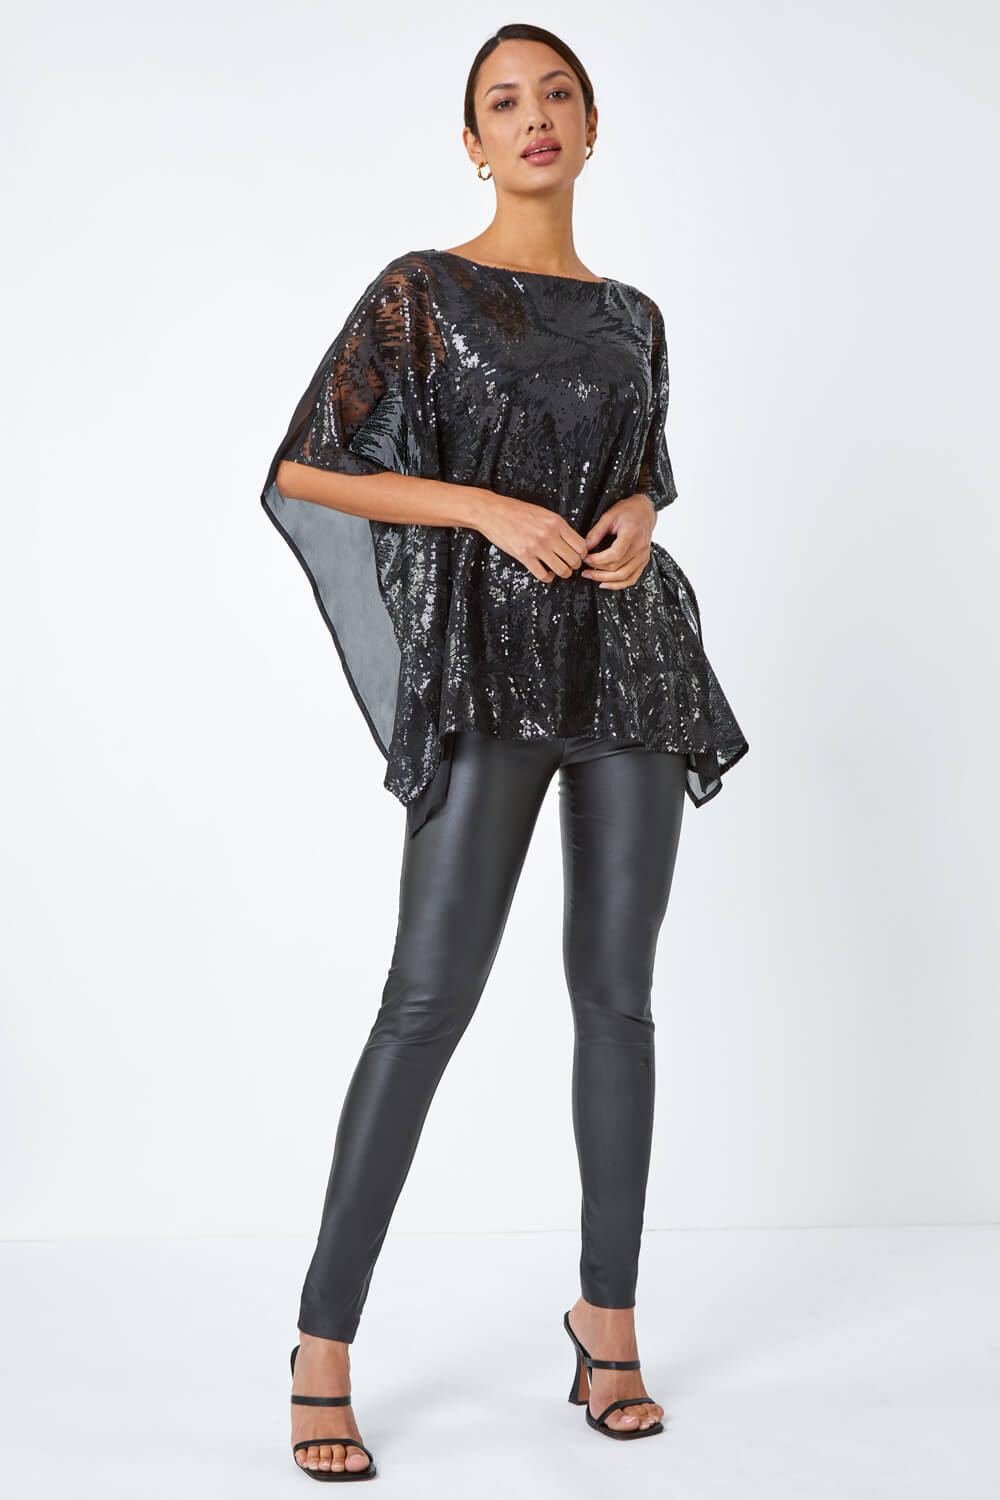 Black Sequin Overlay Stretch Top, Image 2 of 5